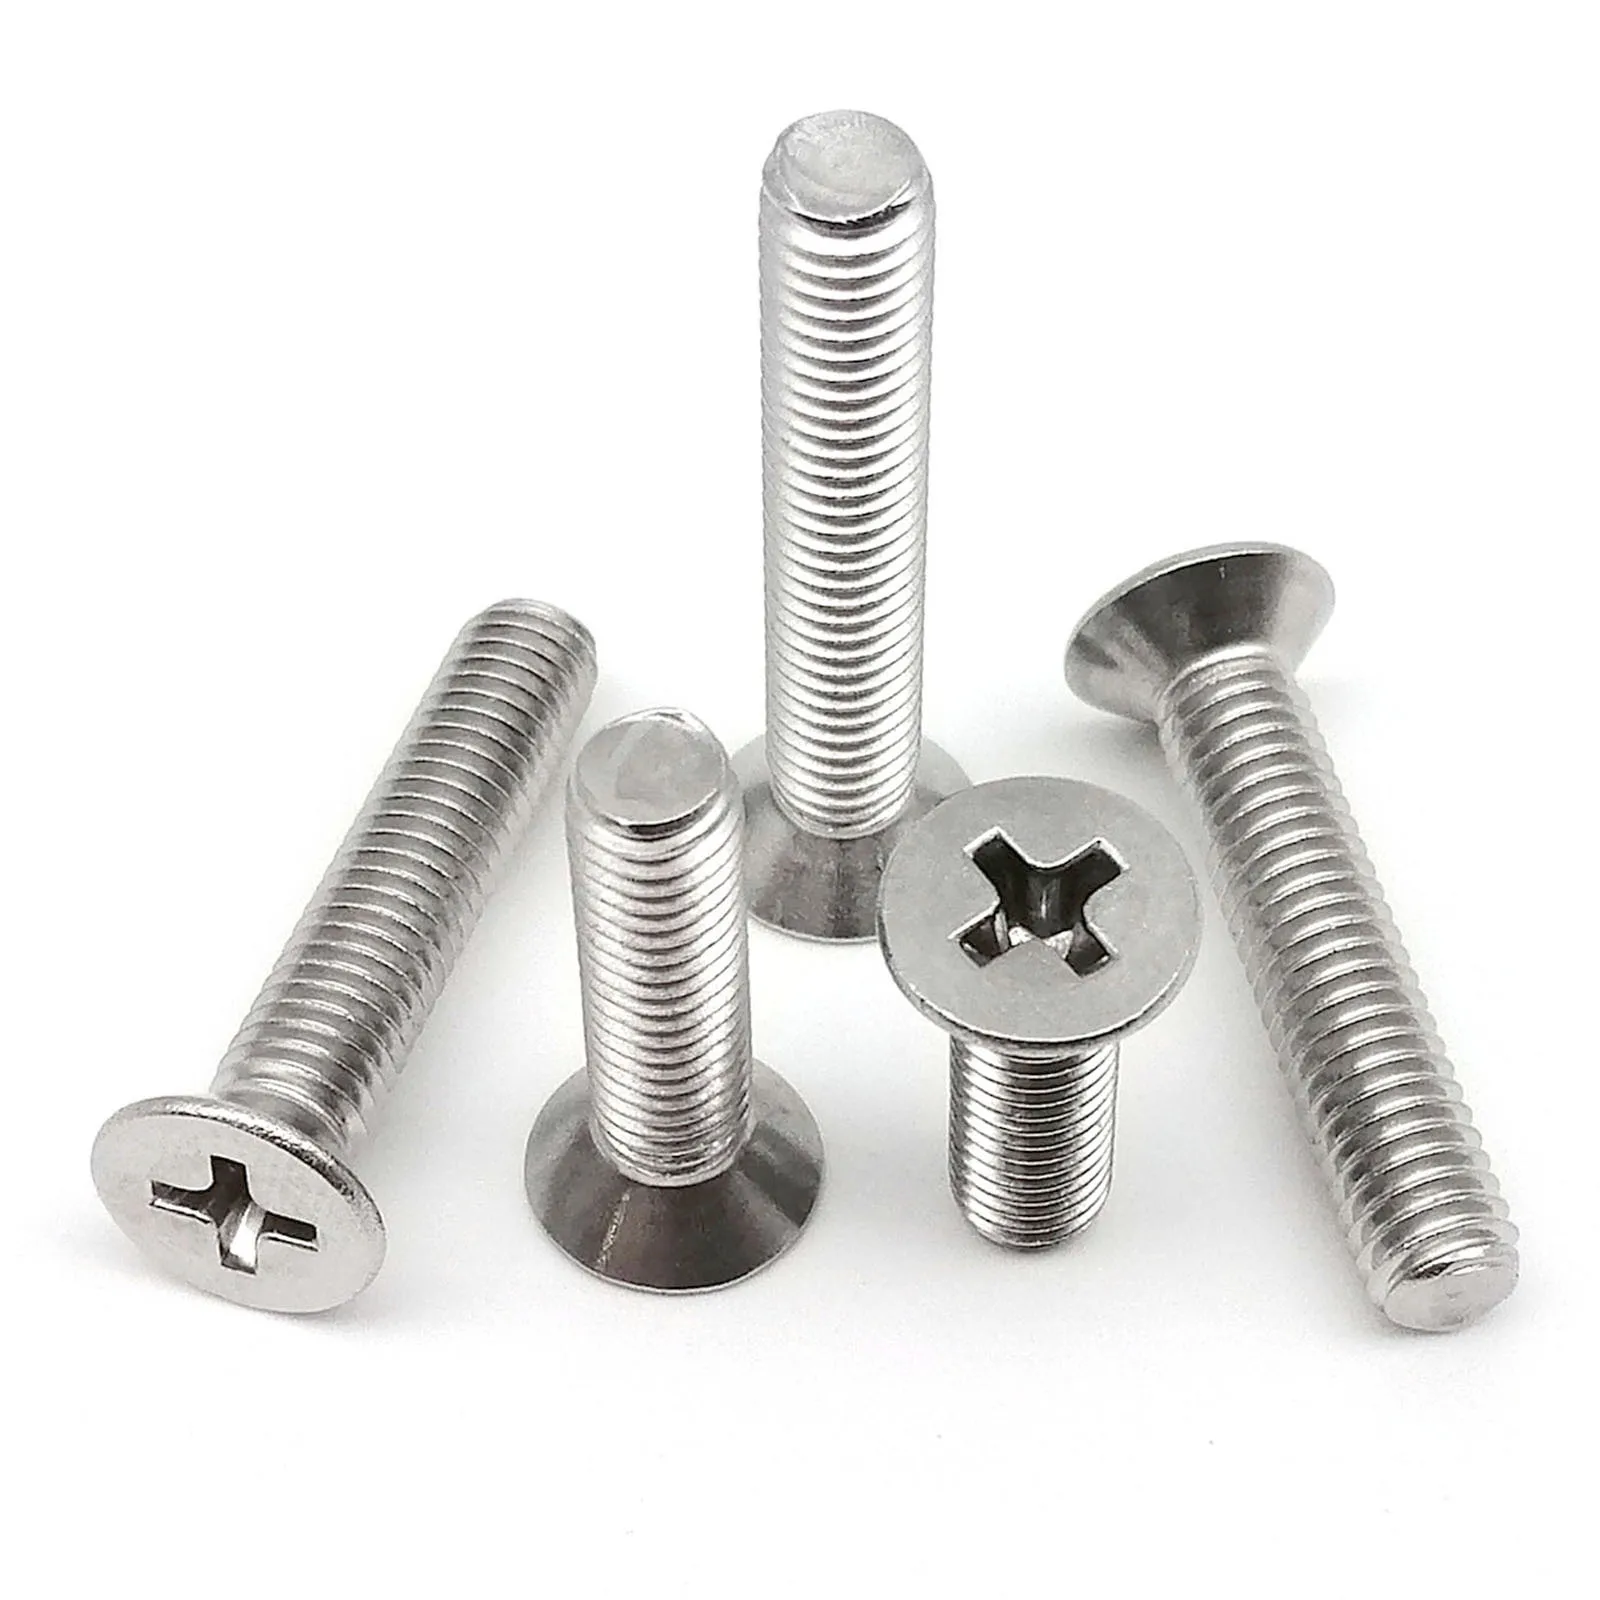 M1 M1.2 M1.6 M2 M2.5 A2 STAINLESS MACHINE SCREWS CSK COUNTERSUNK SLOTTED BOLTS 